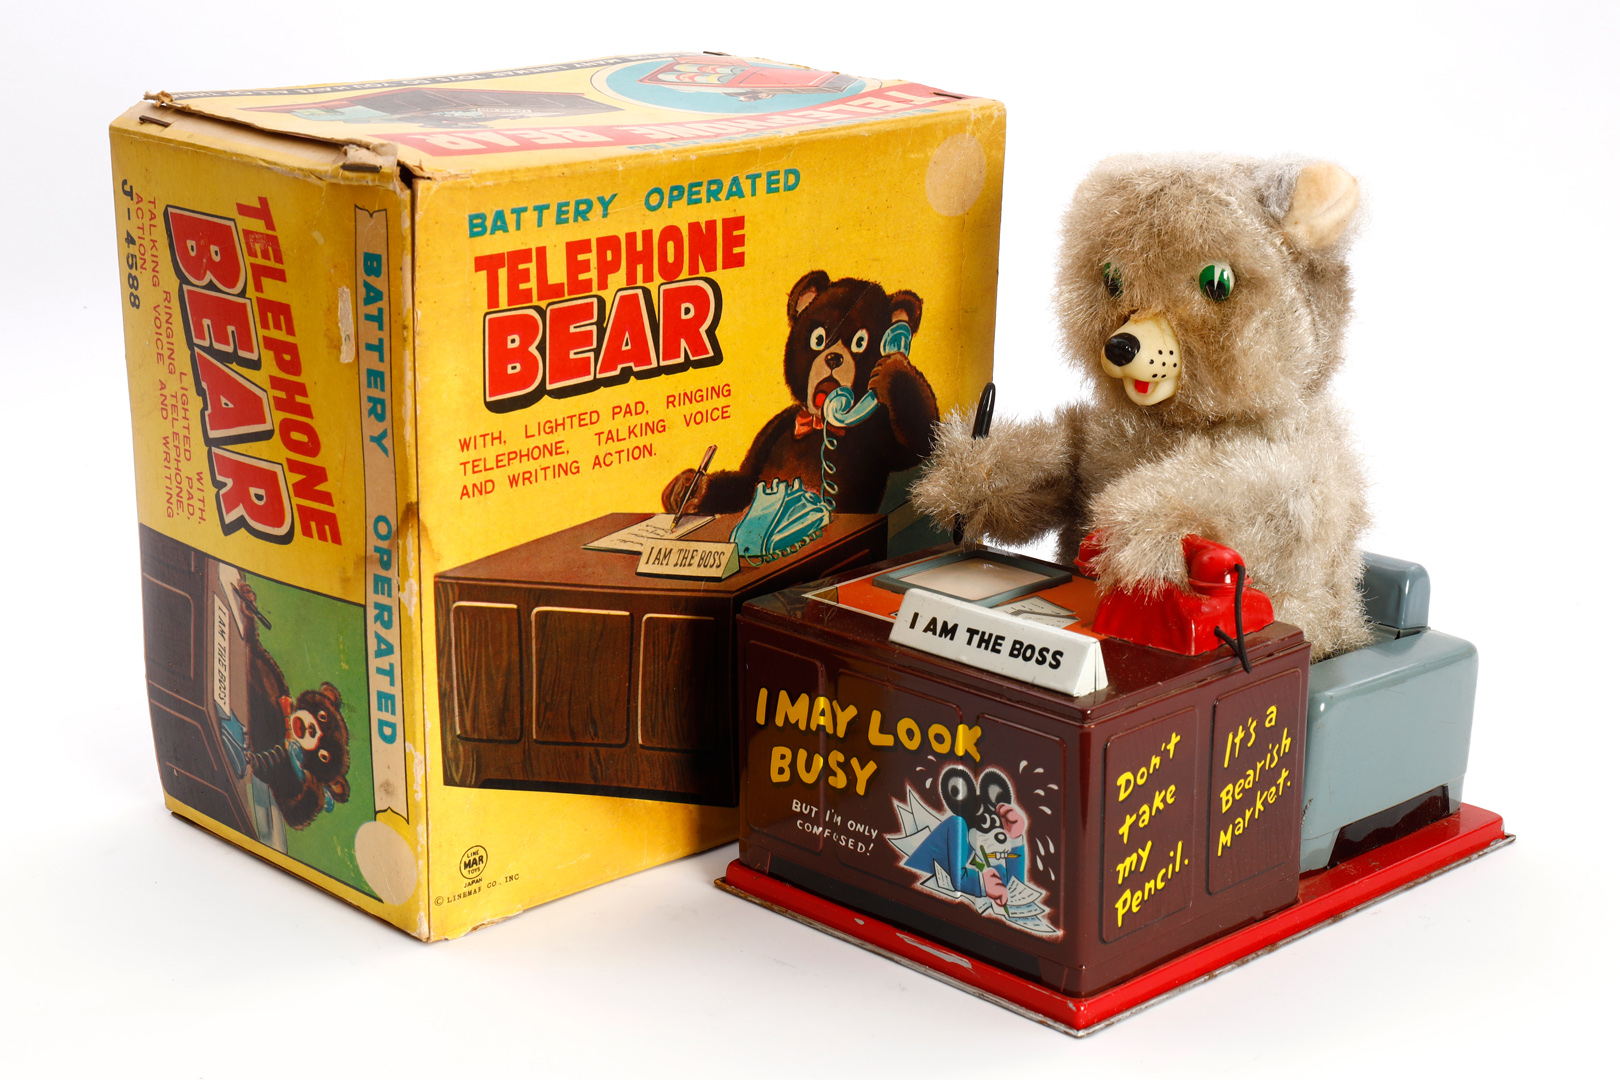 LINEMAR TOYS Japan Automat ”TELEPHONE BEAR I AM THE BOSS” 4588, with lighted pad, ringing telephone,